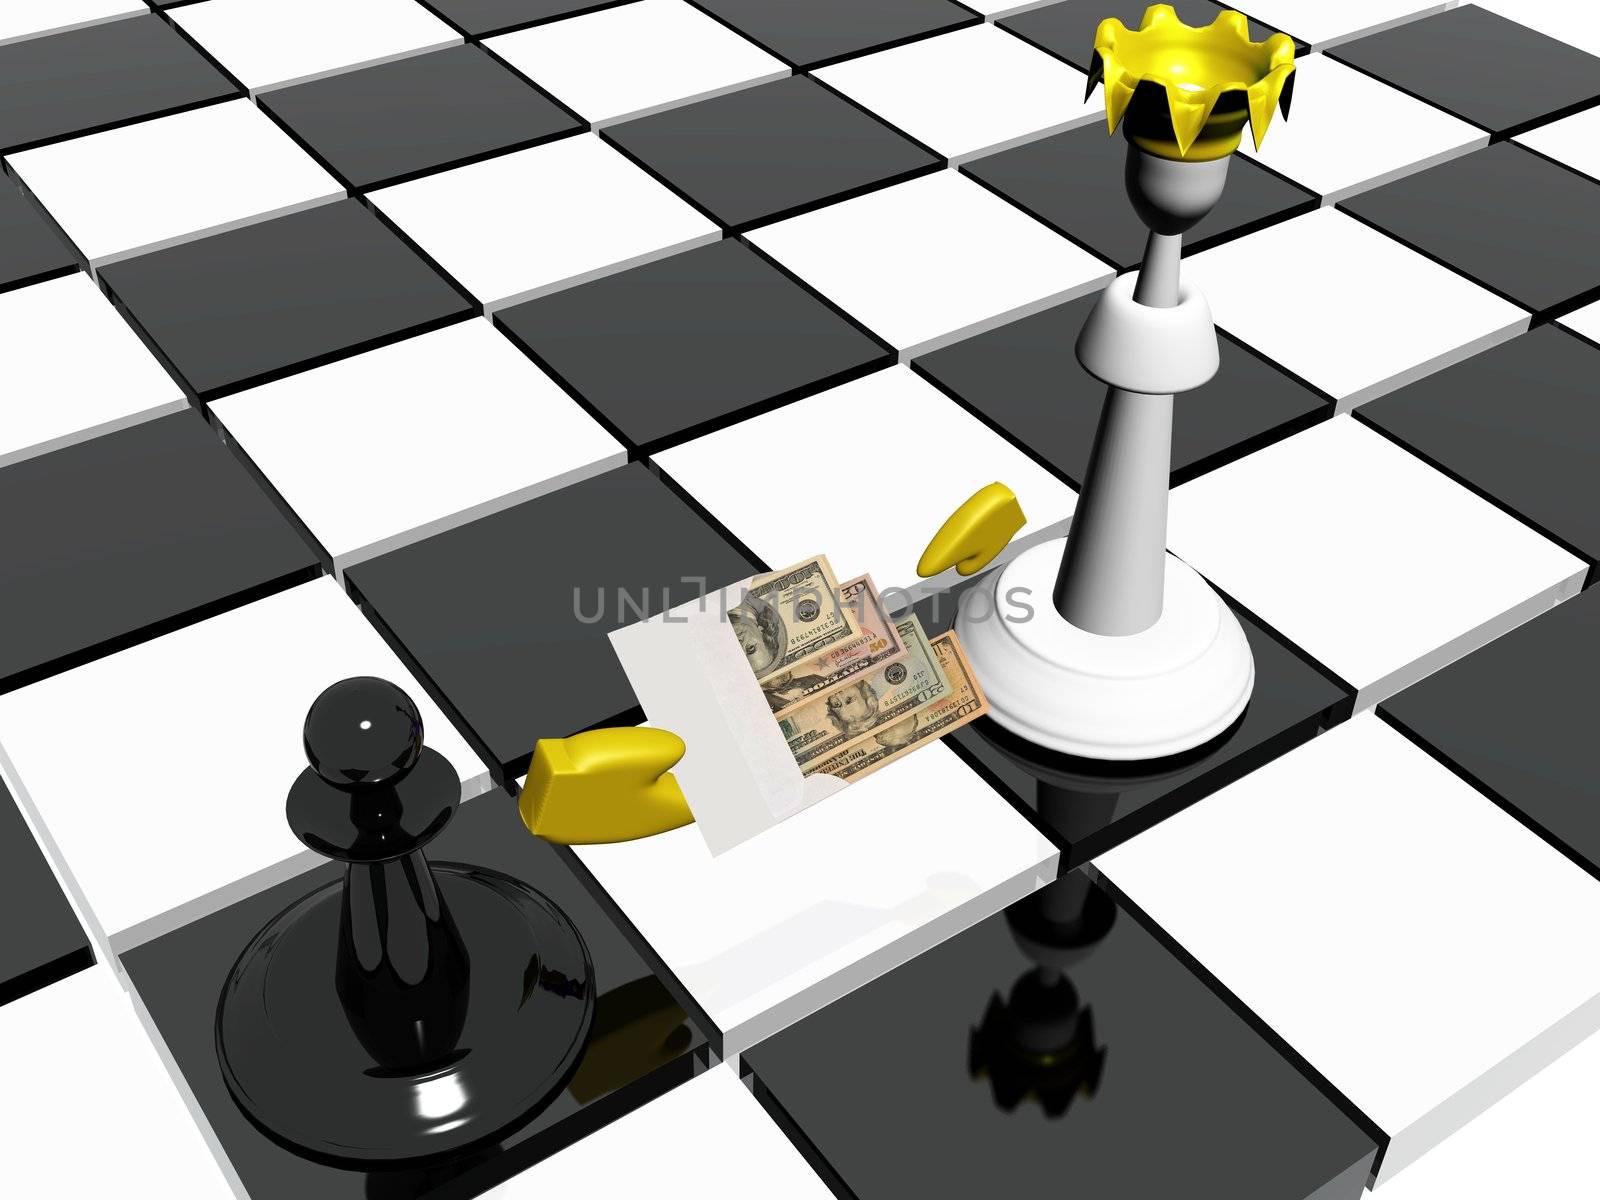 The Black Pawn Transfers an White Envelope 
With American Dollars to The White King.